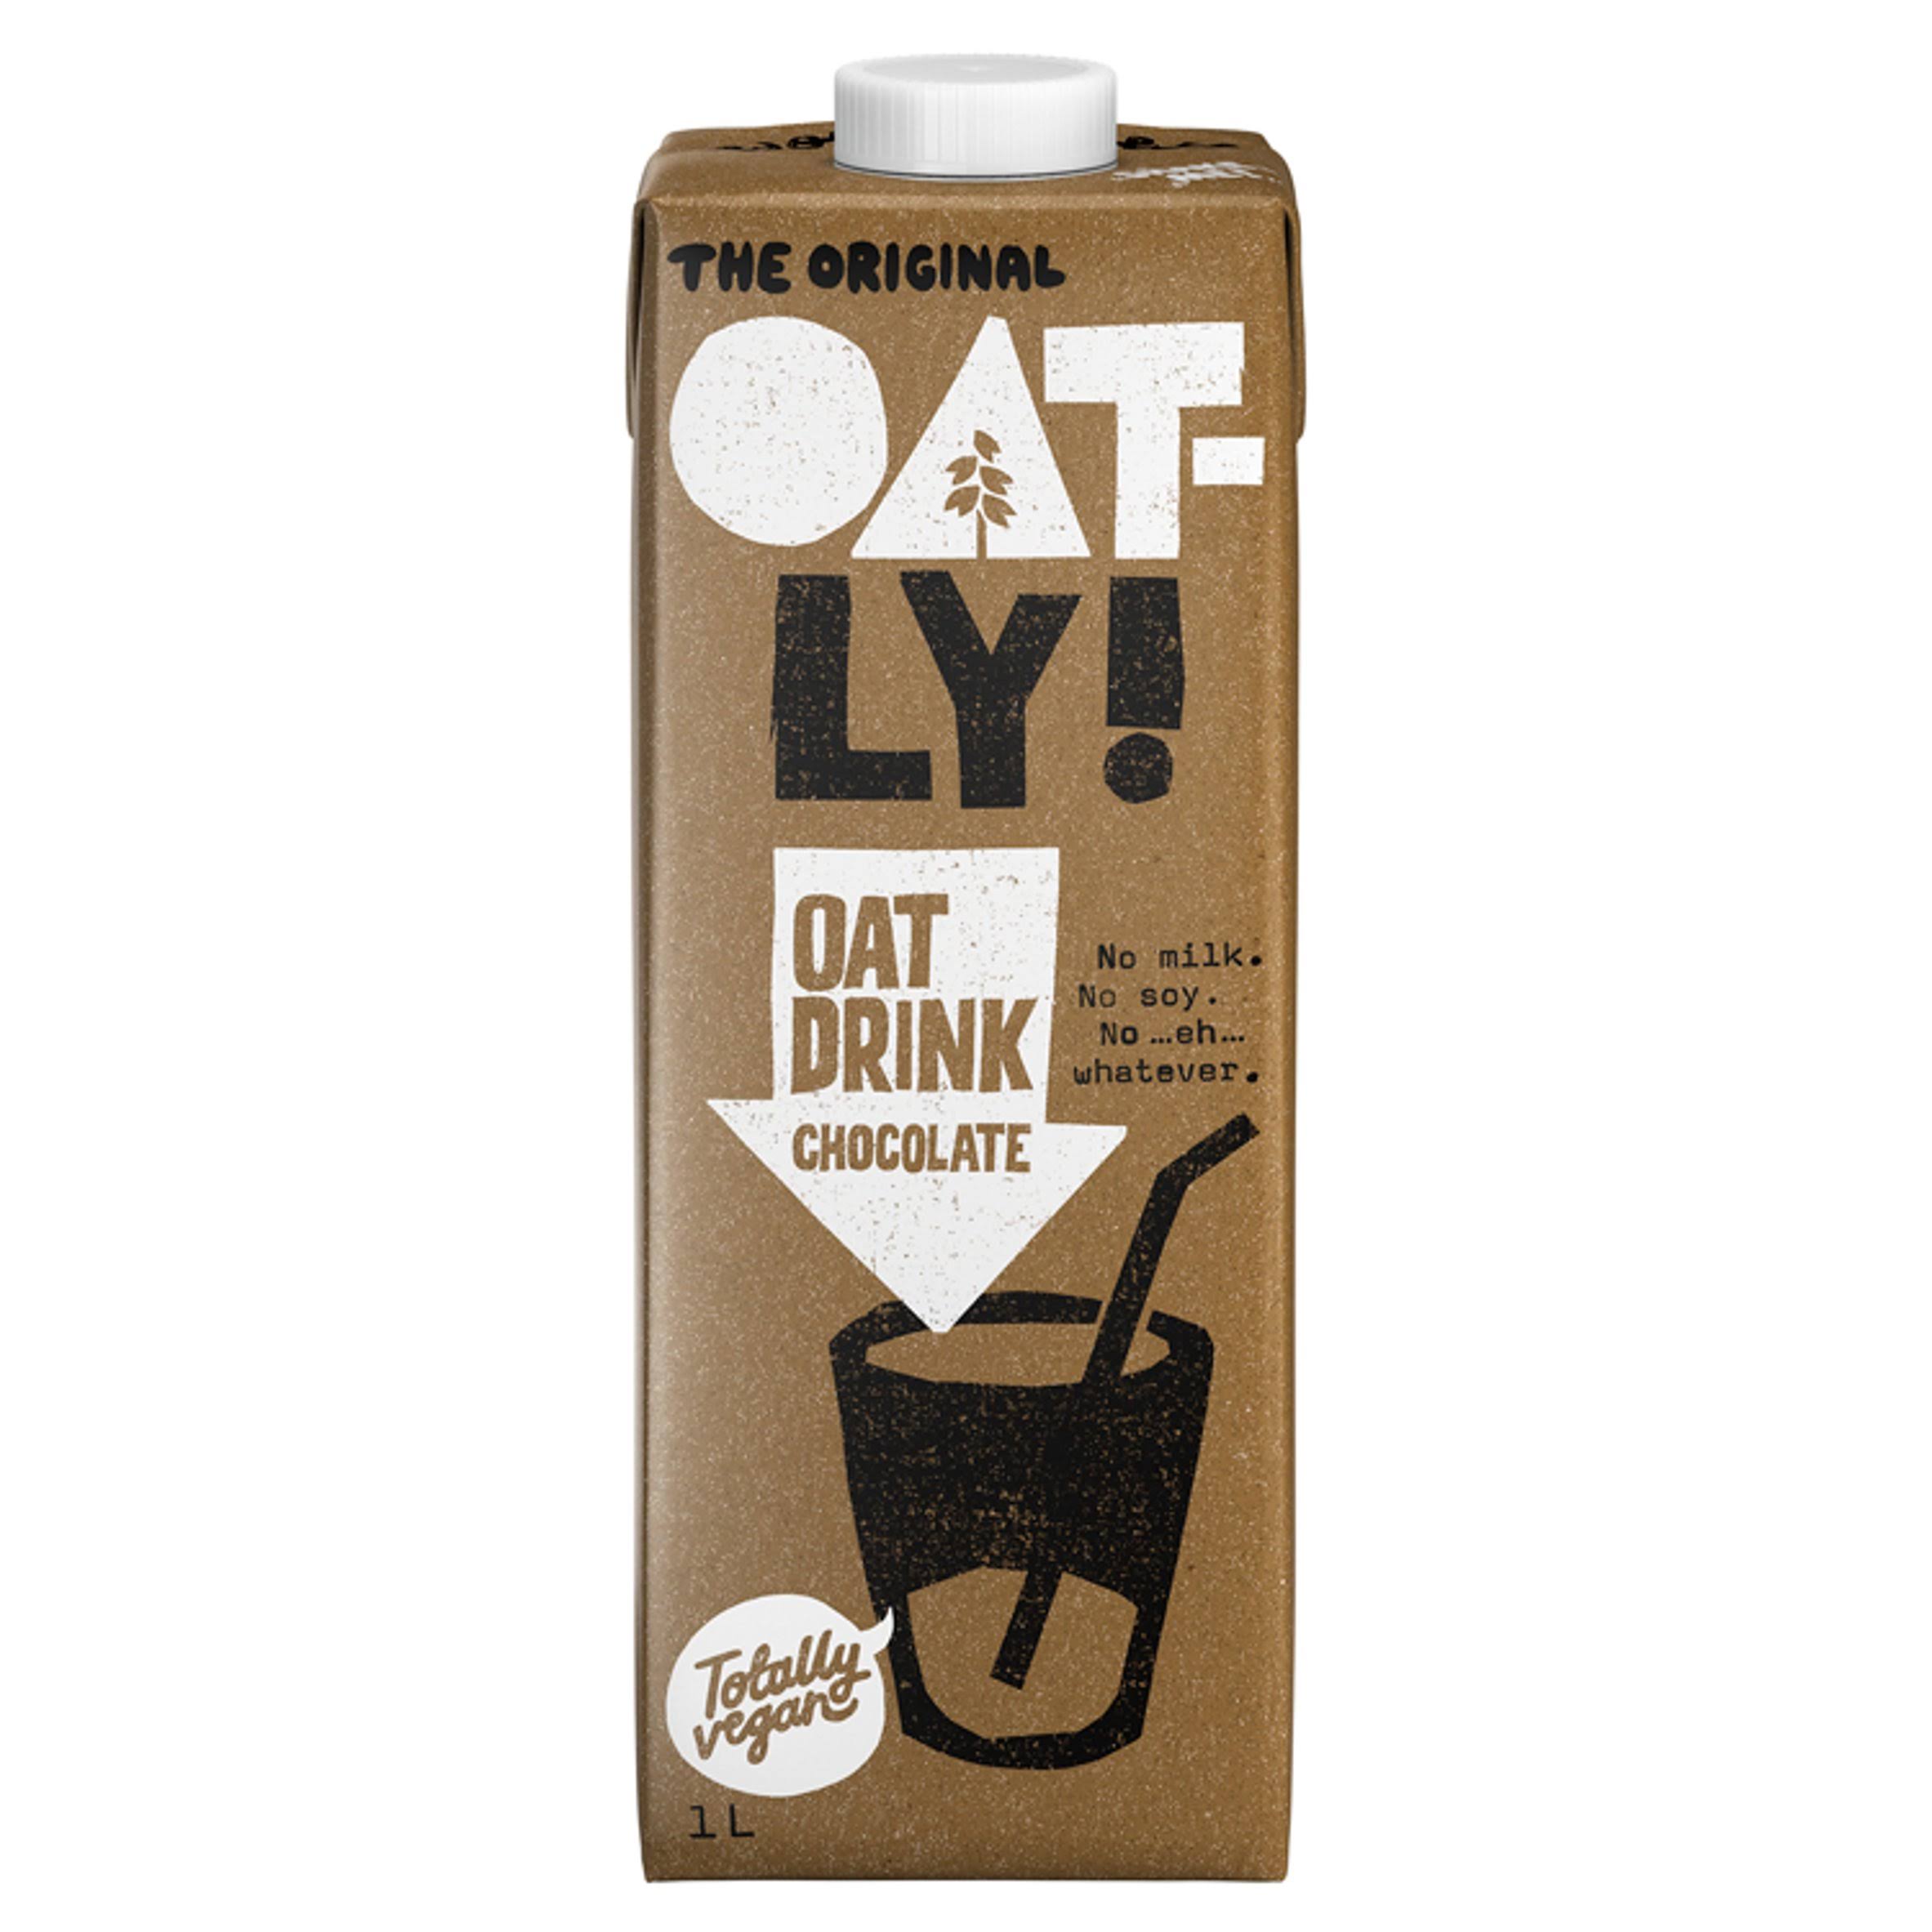 Oatly the Original Oat Drink - Chocolate, 1L